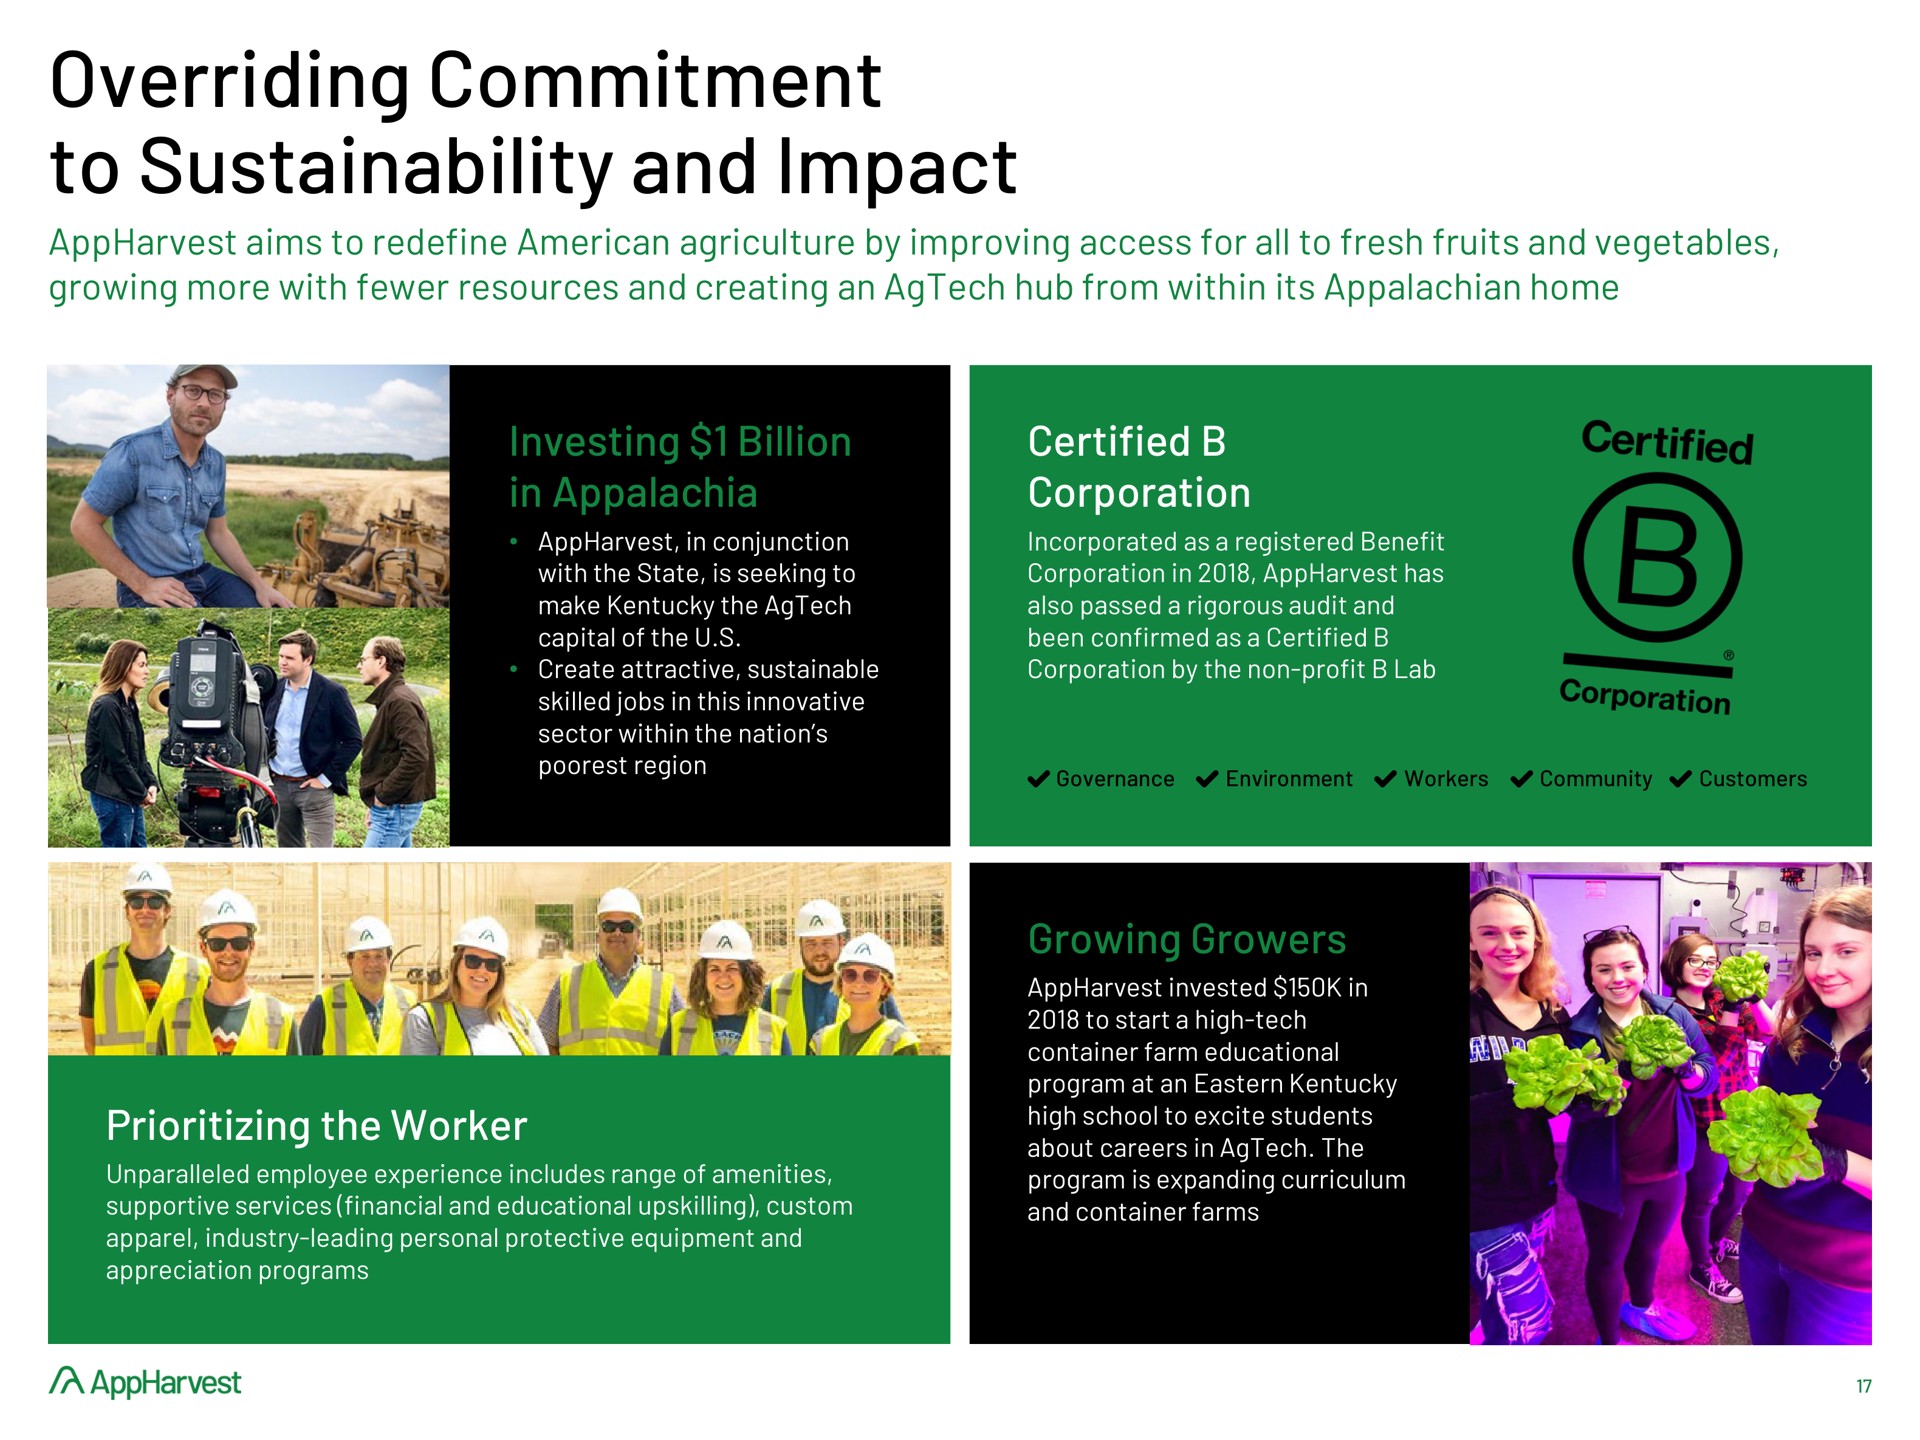 overriding commitment to and impact investing billion in certified corporation the worker growing growers | AppHarvest